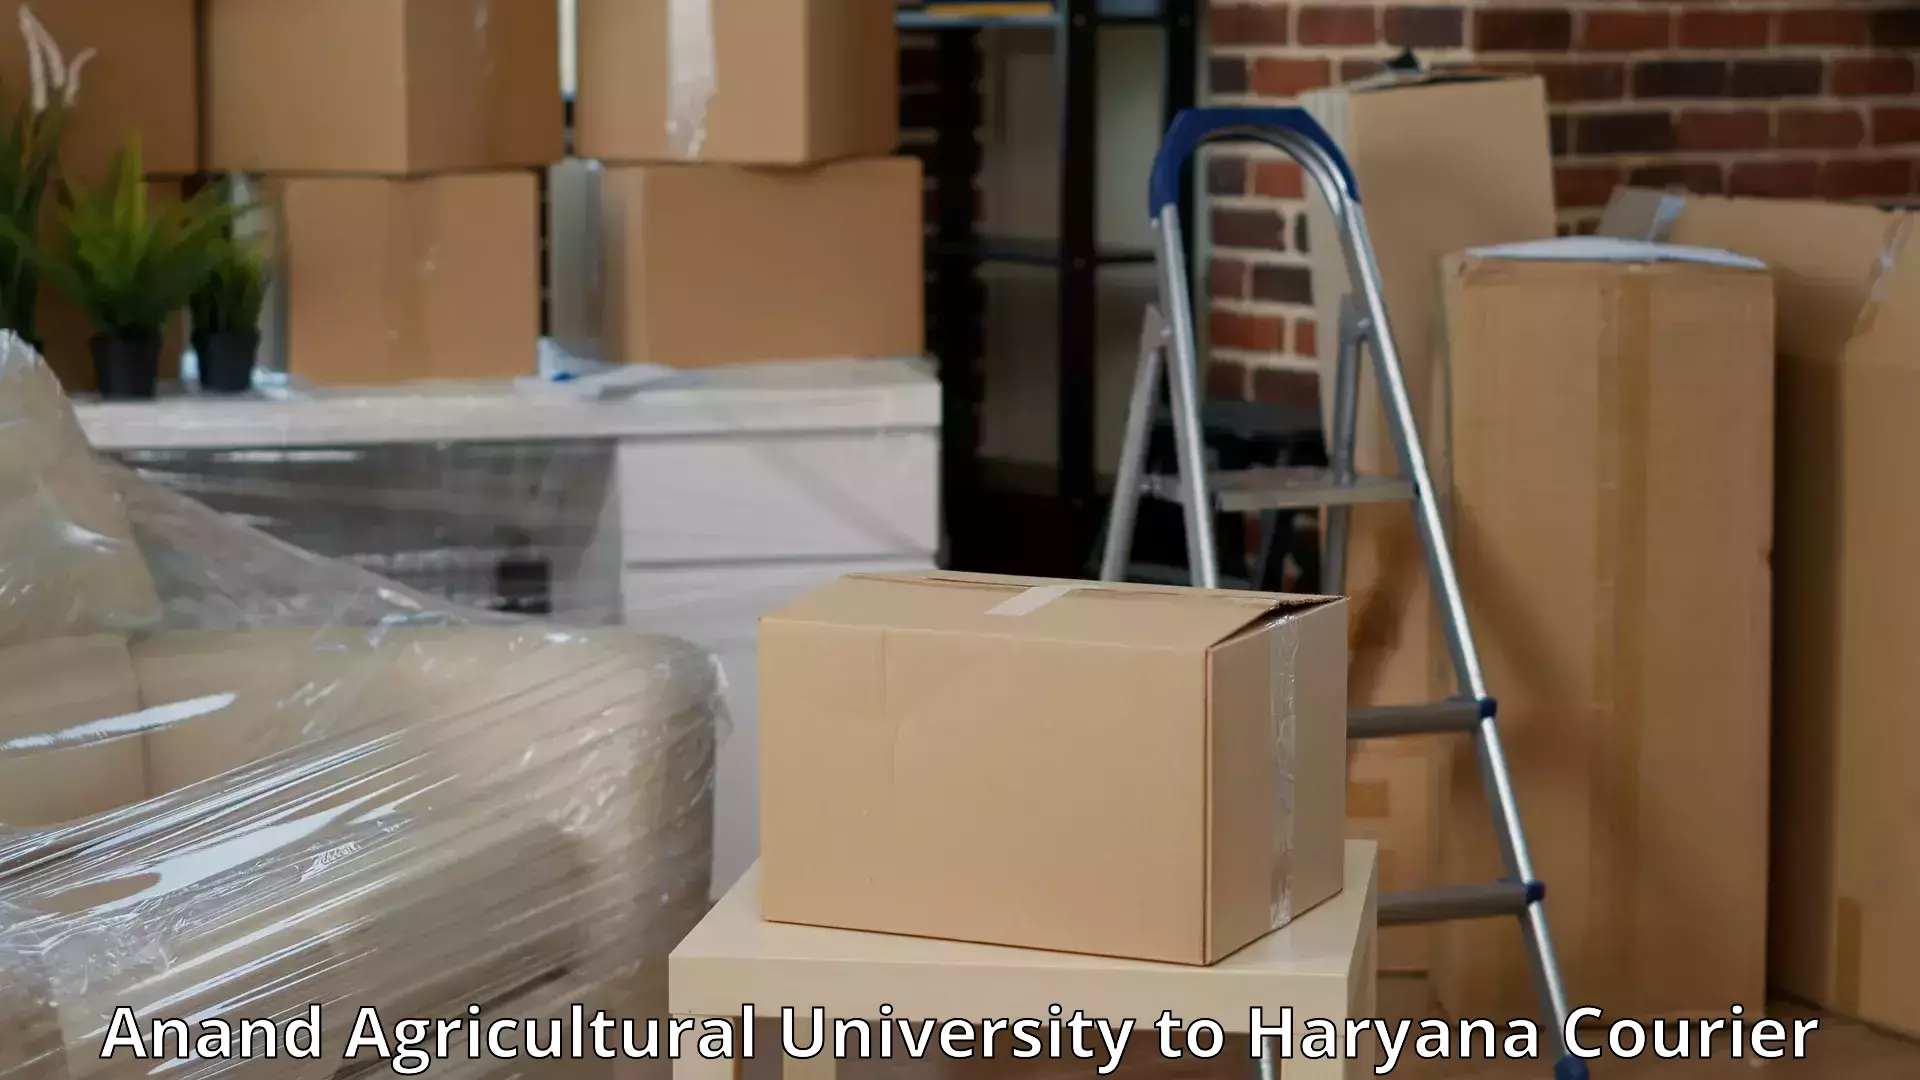 Efficient home movers Anand Agricultural University to Chaudhary Charan Singh Haryana Agricultural University Hisar